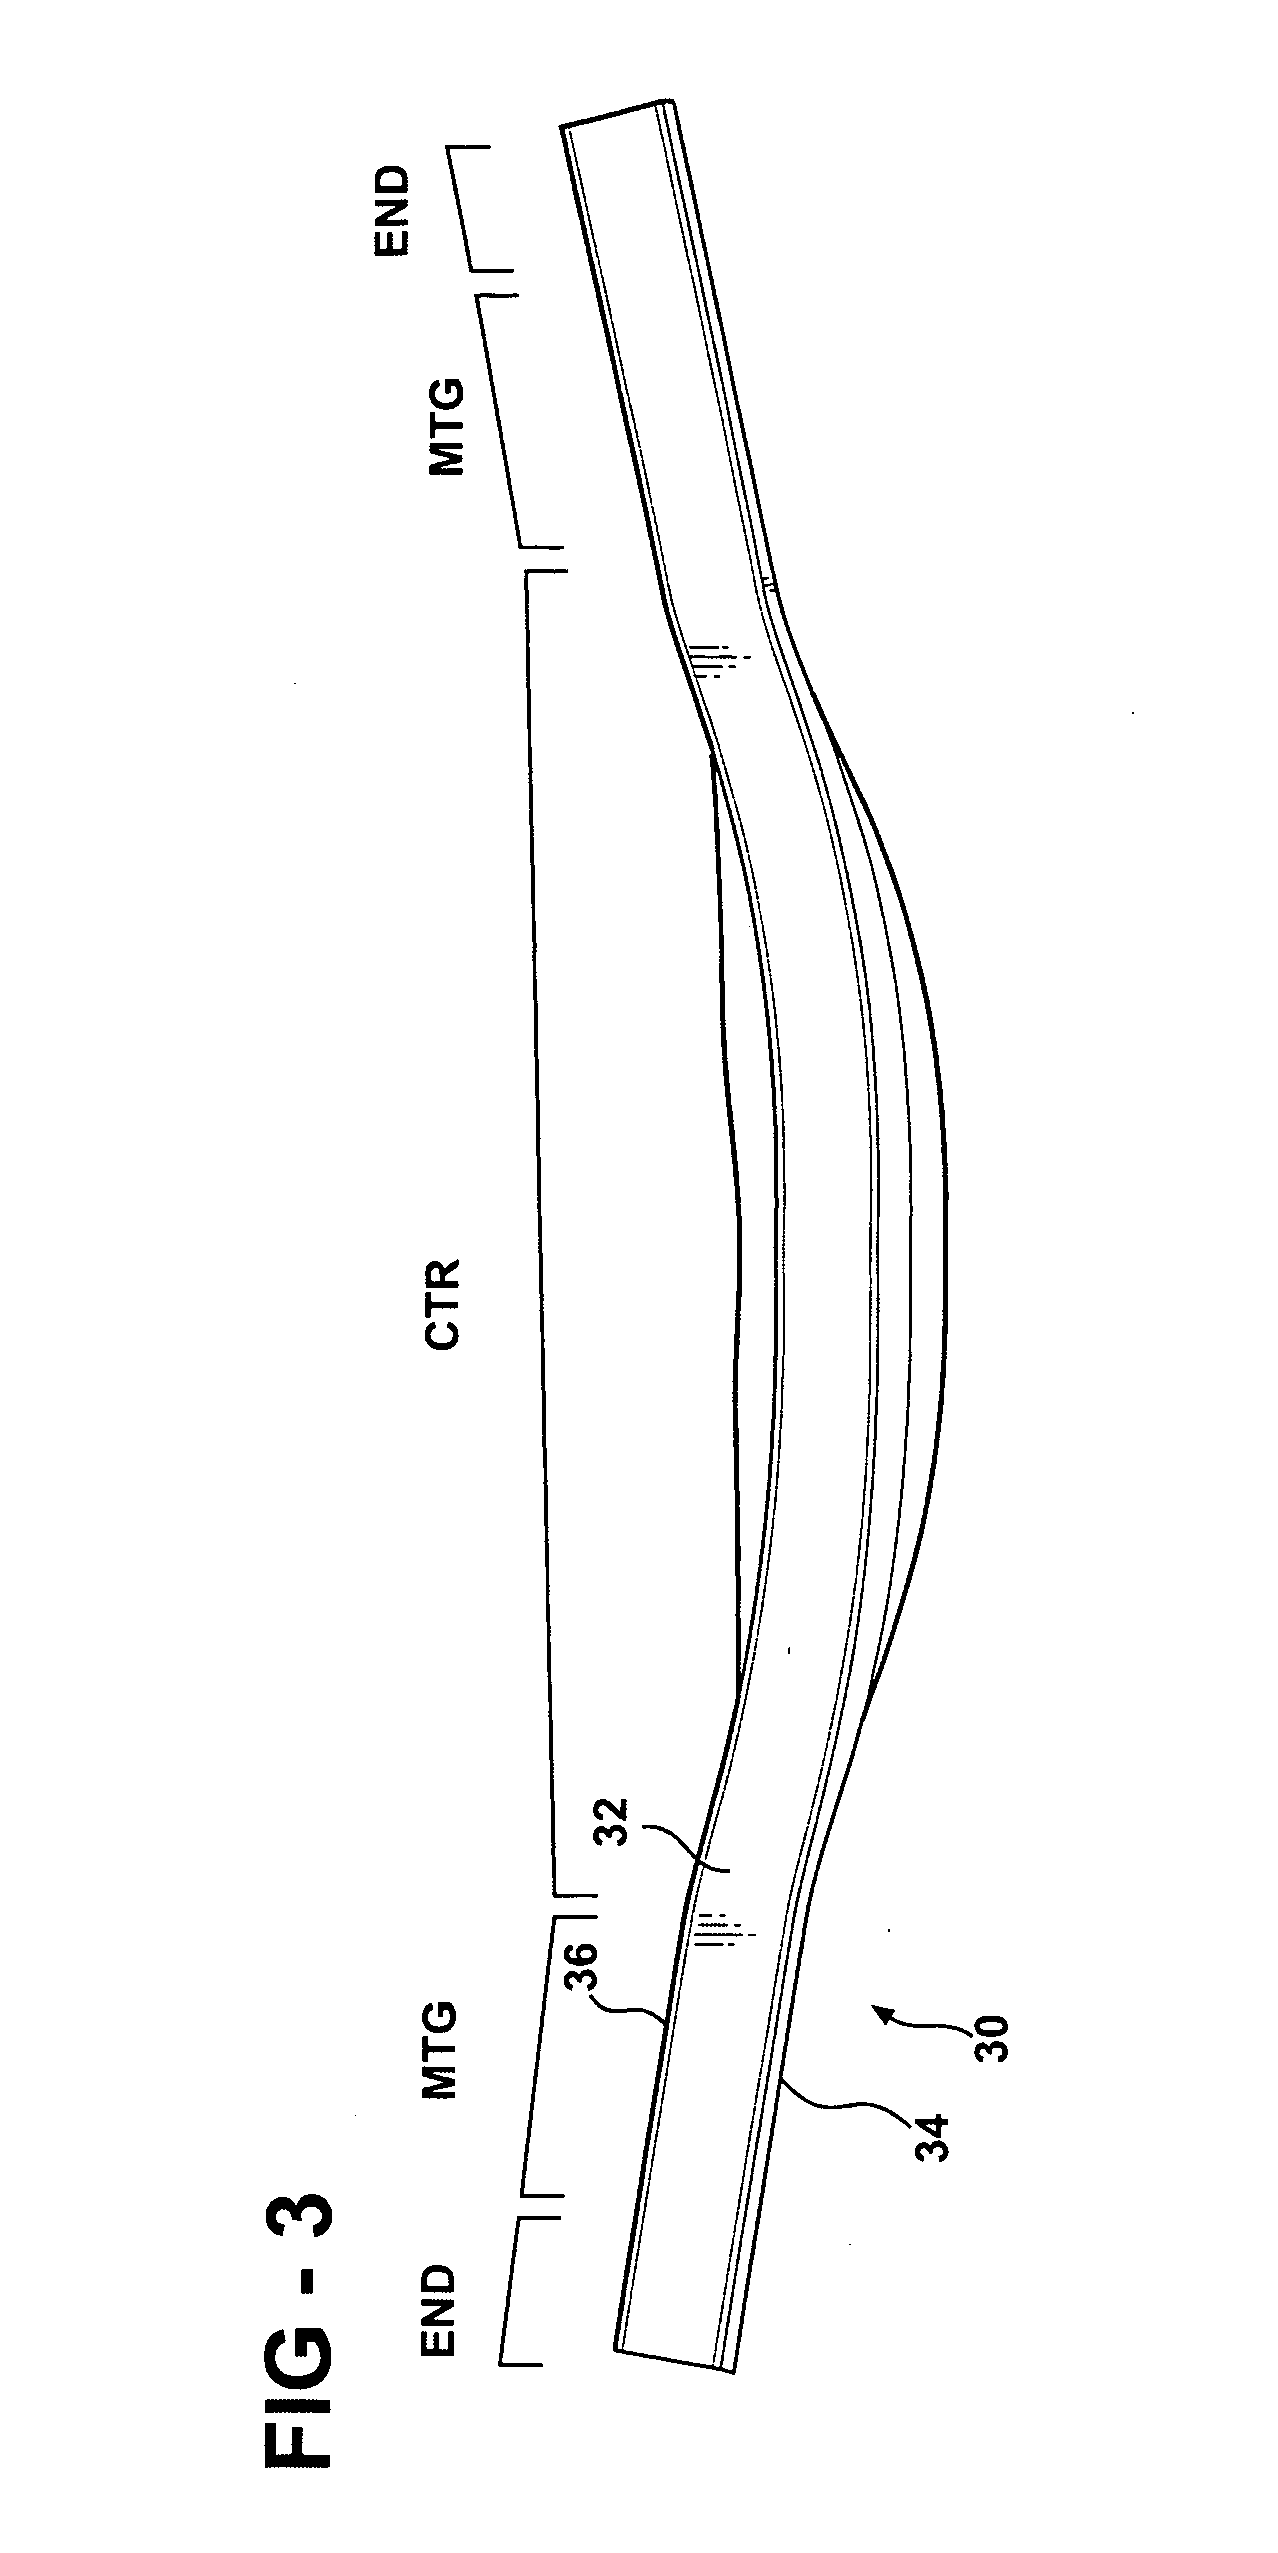 Elongated bumper bar with sections twisted rotationally about the axis of elongation and method of making the same